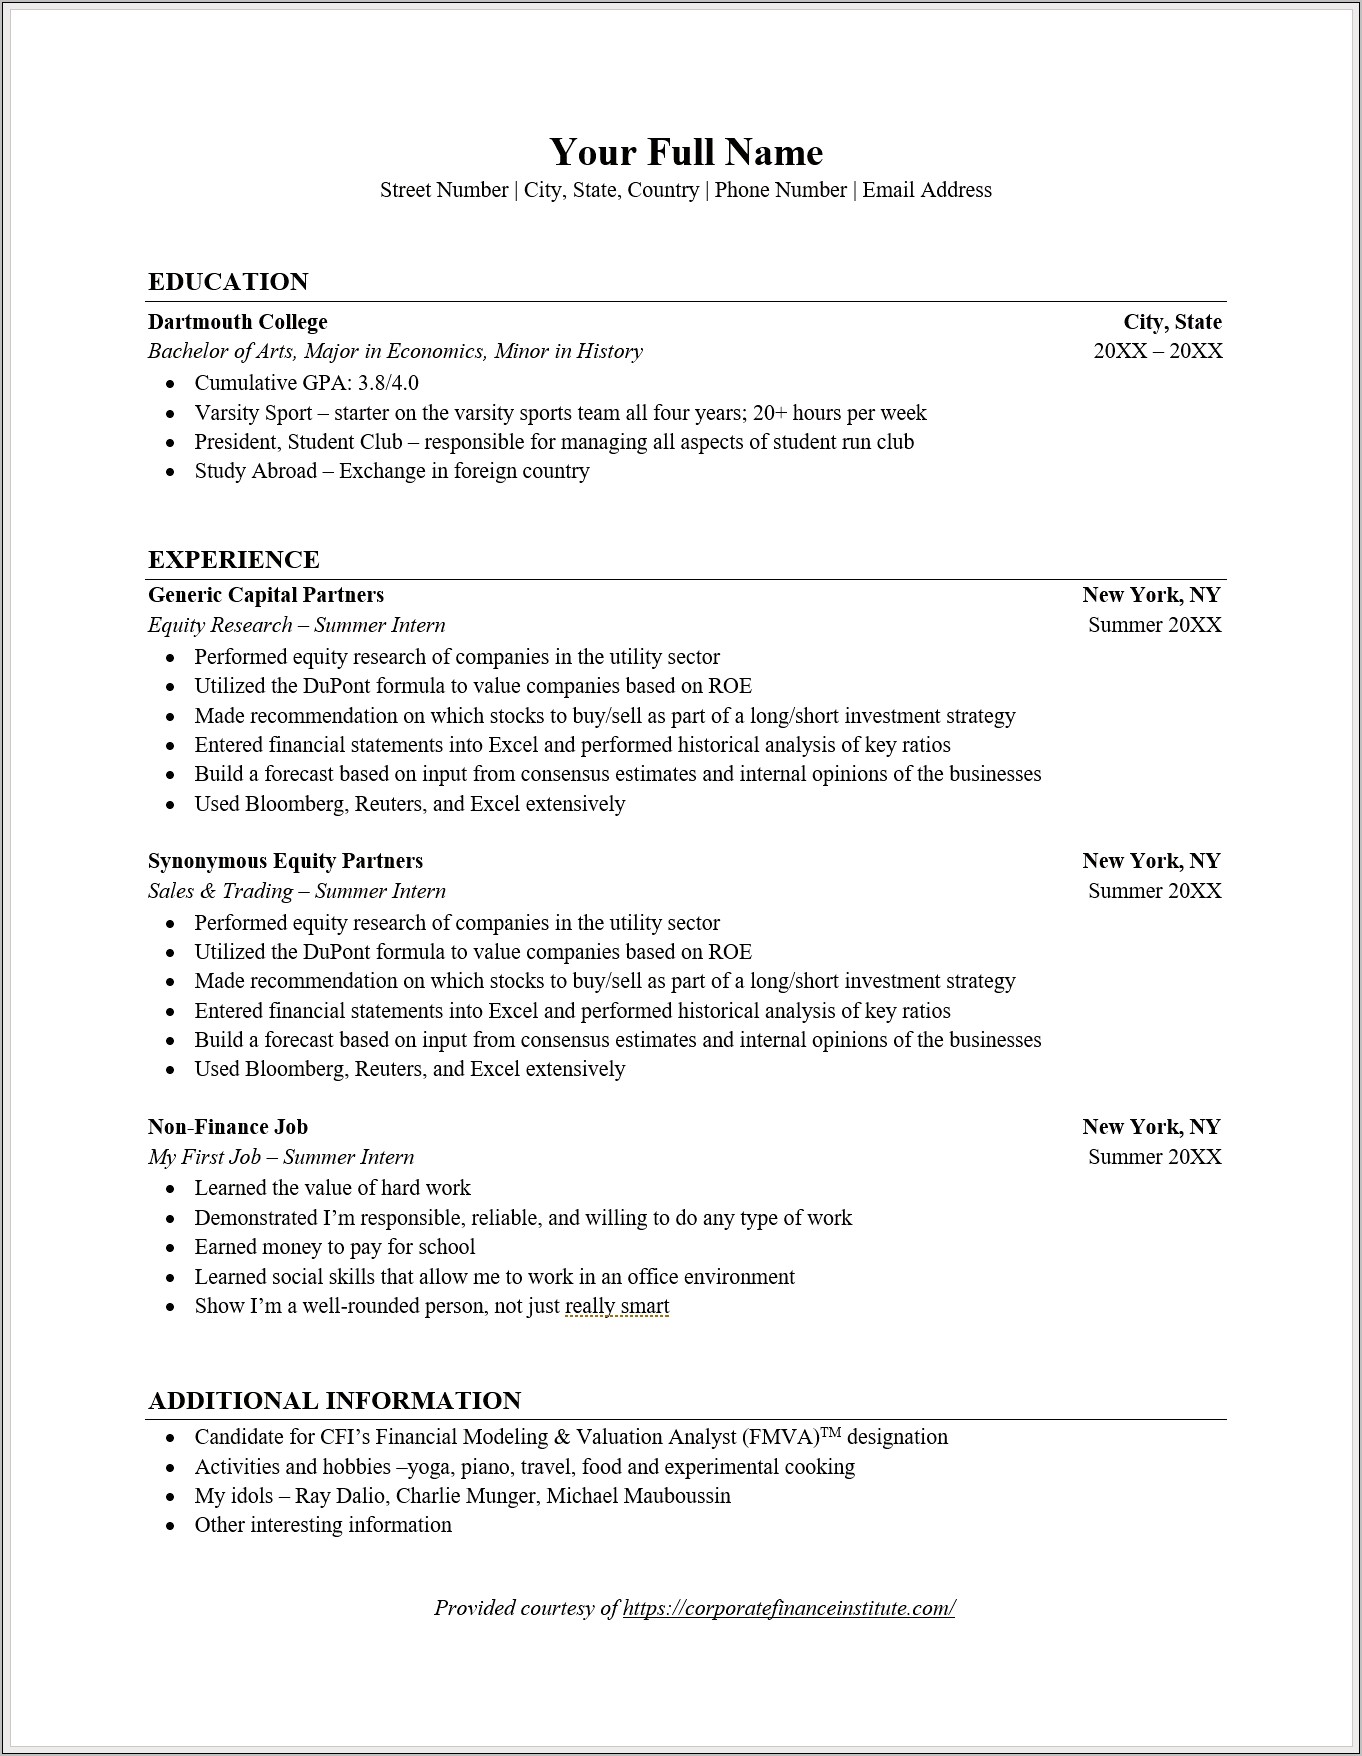 Jobs Types According To The Resumes